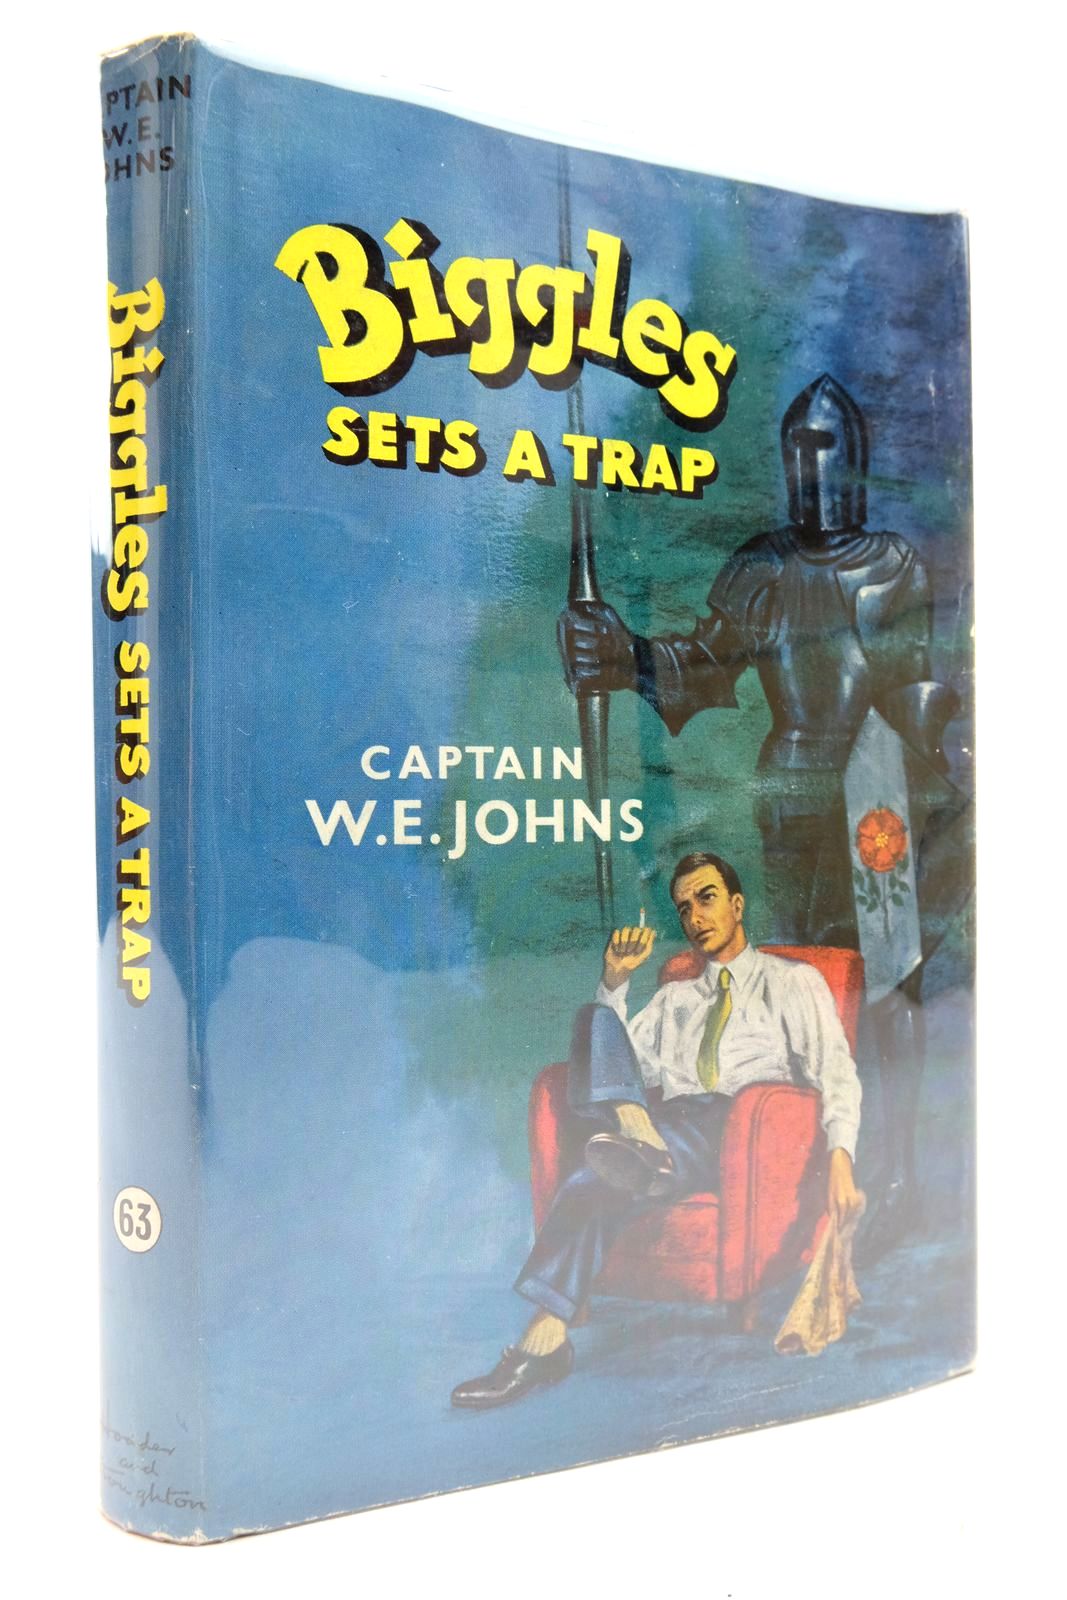 Photo of BIGGLES SETS A TRAP written by Johns, W.E. illustrated by Stead,  published by Hodder &amp; Stoughton (STOCK CODE: 2137304)  for sale by Stella & Rose's Books